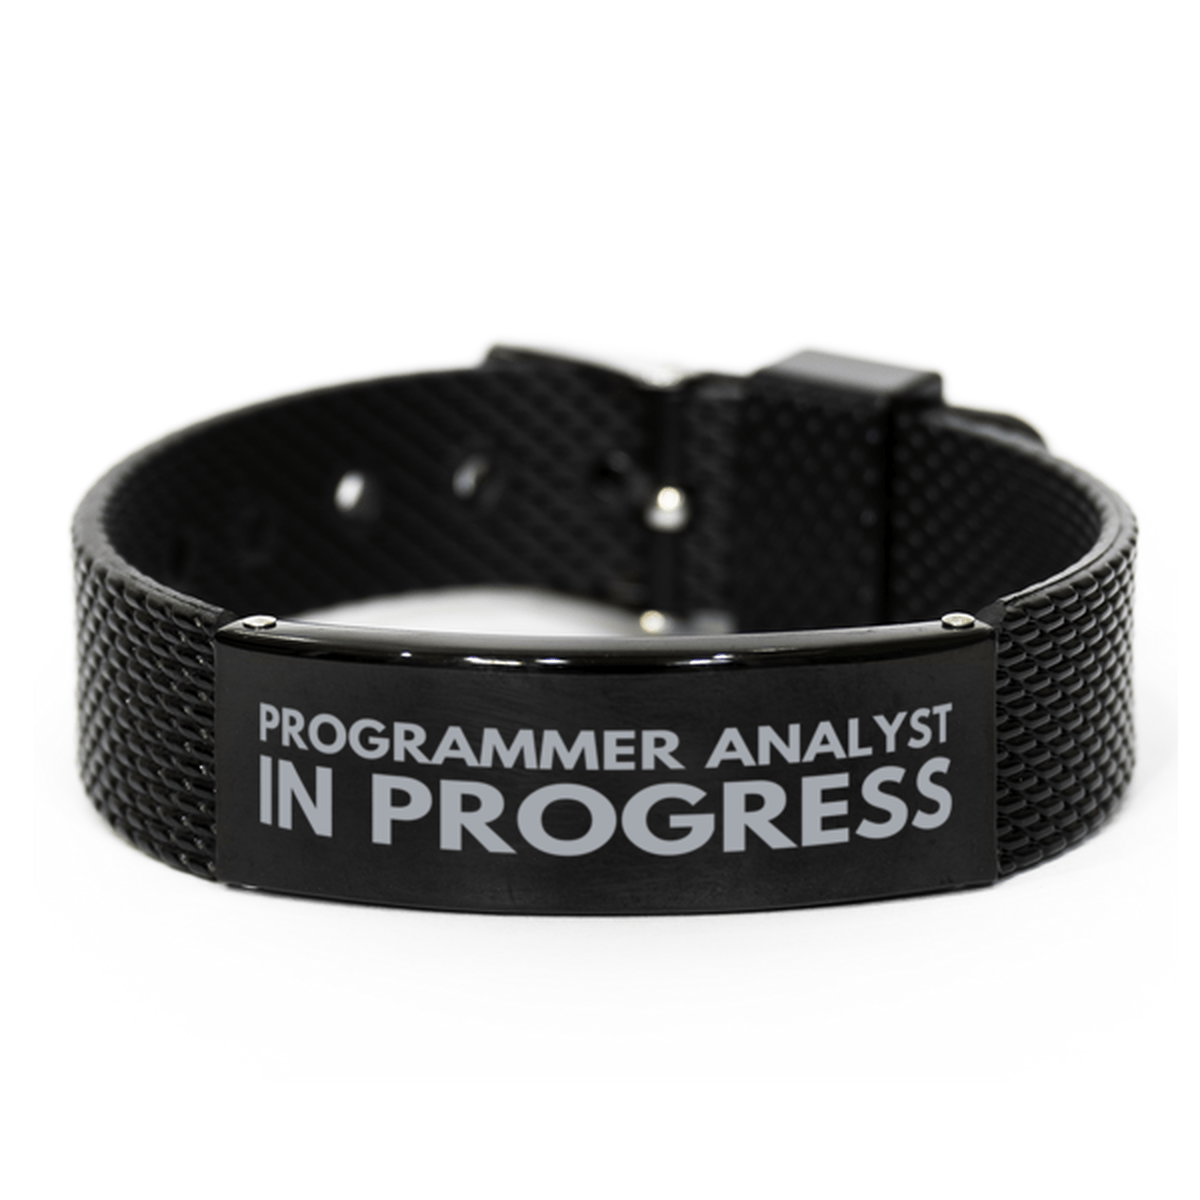 Inspirational Programmer Analyst Black Shark Mesh Bracelet, Programmer Analyst In Progress, Best Graduation Gifts for Students